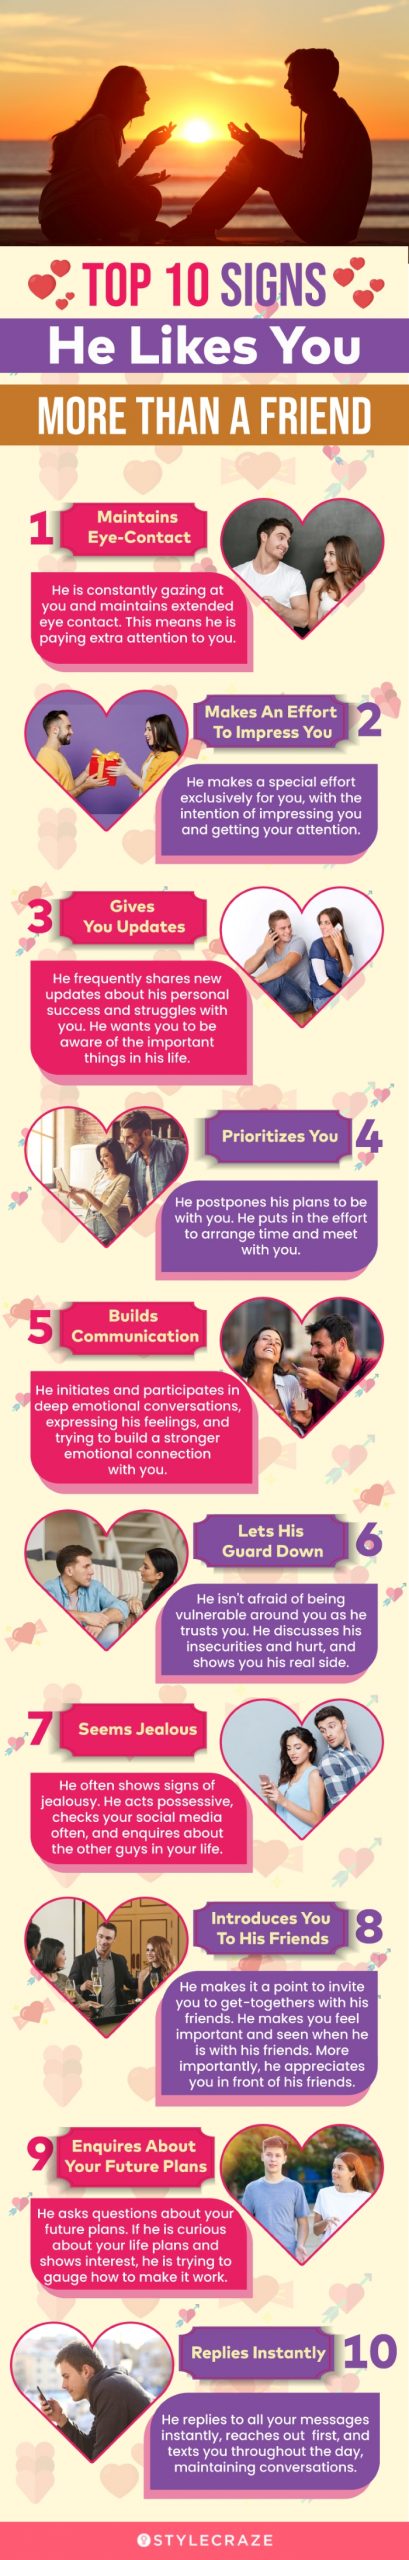 top 10 signs he likes you more than friend (infographic)